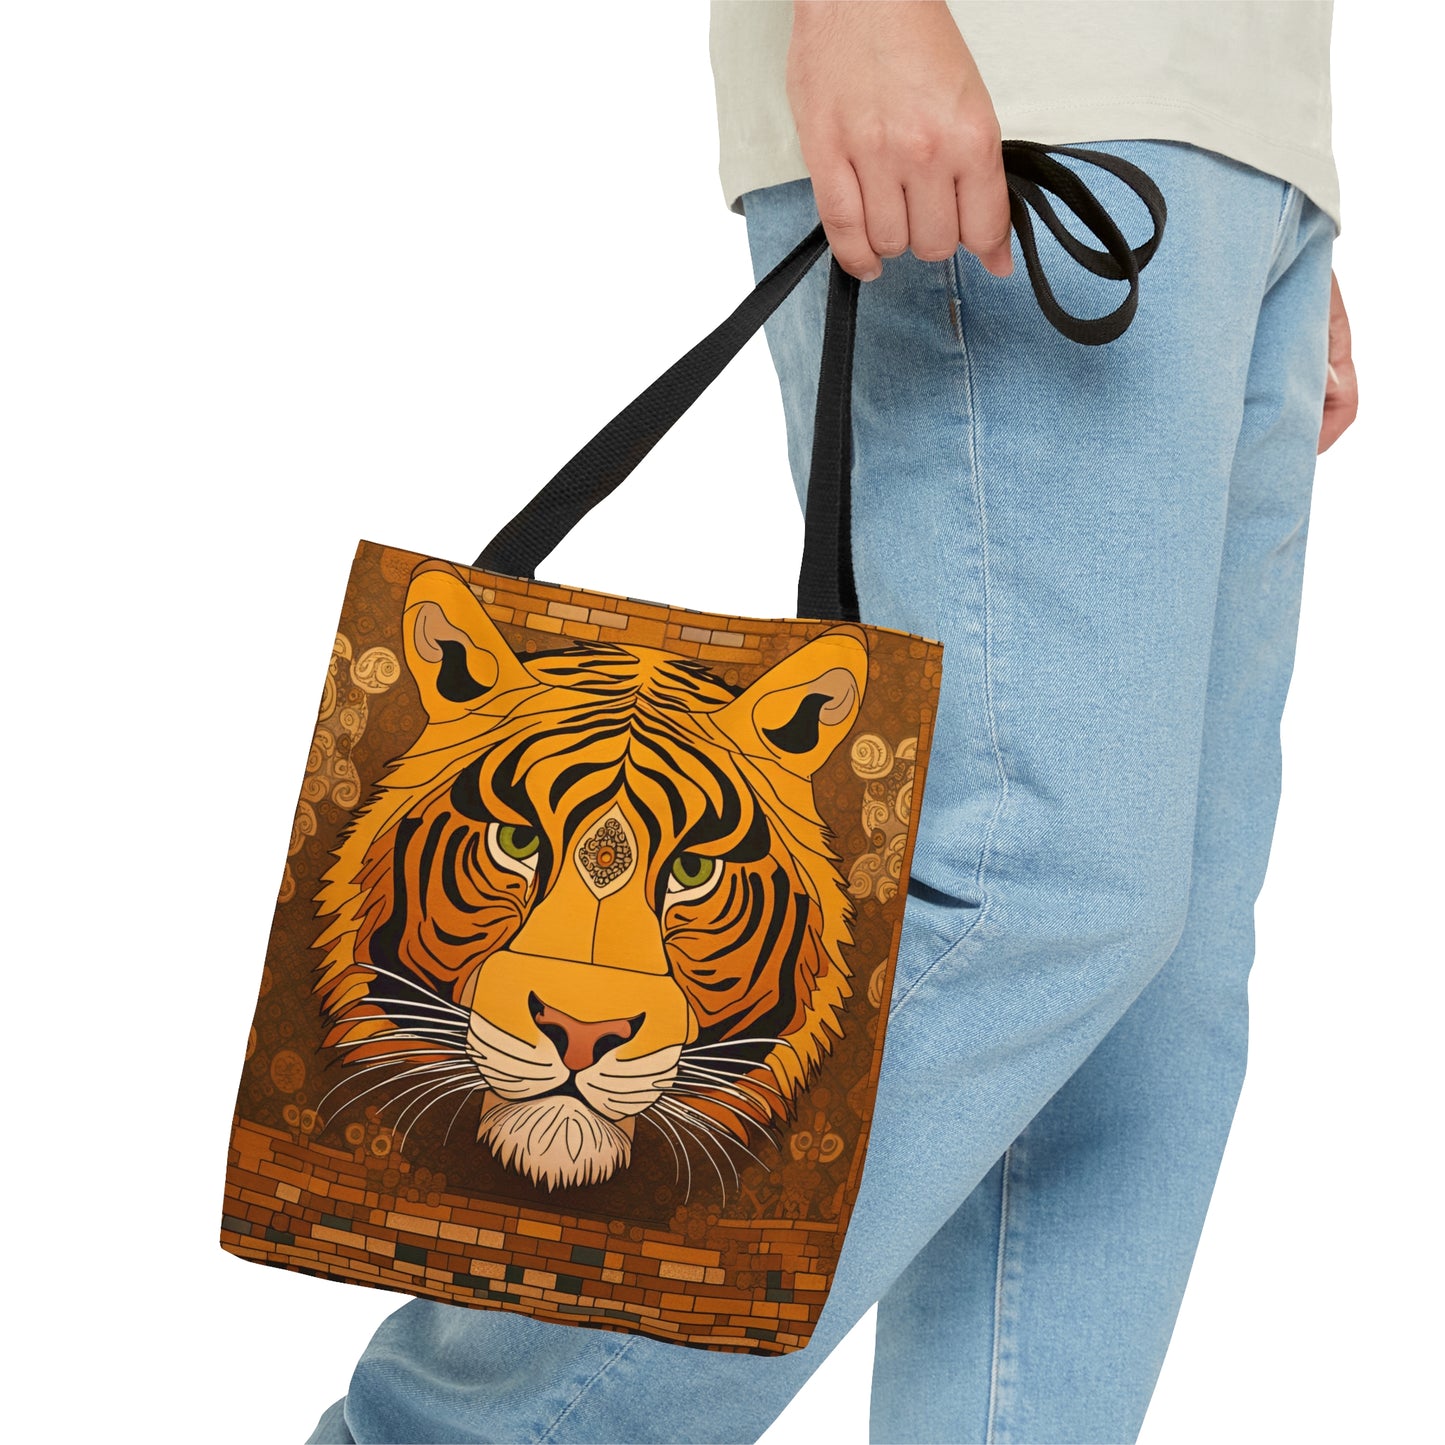 Tiger Head in the Style of Gustav Klimt Printed on Tote Bag small carried